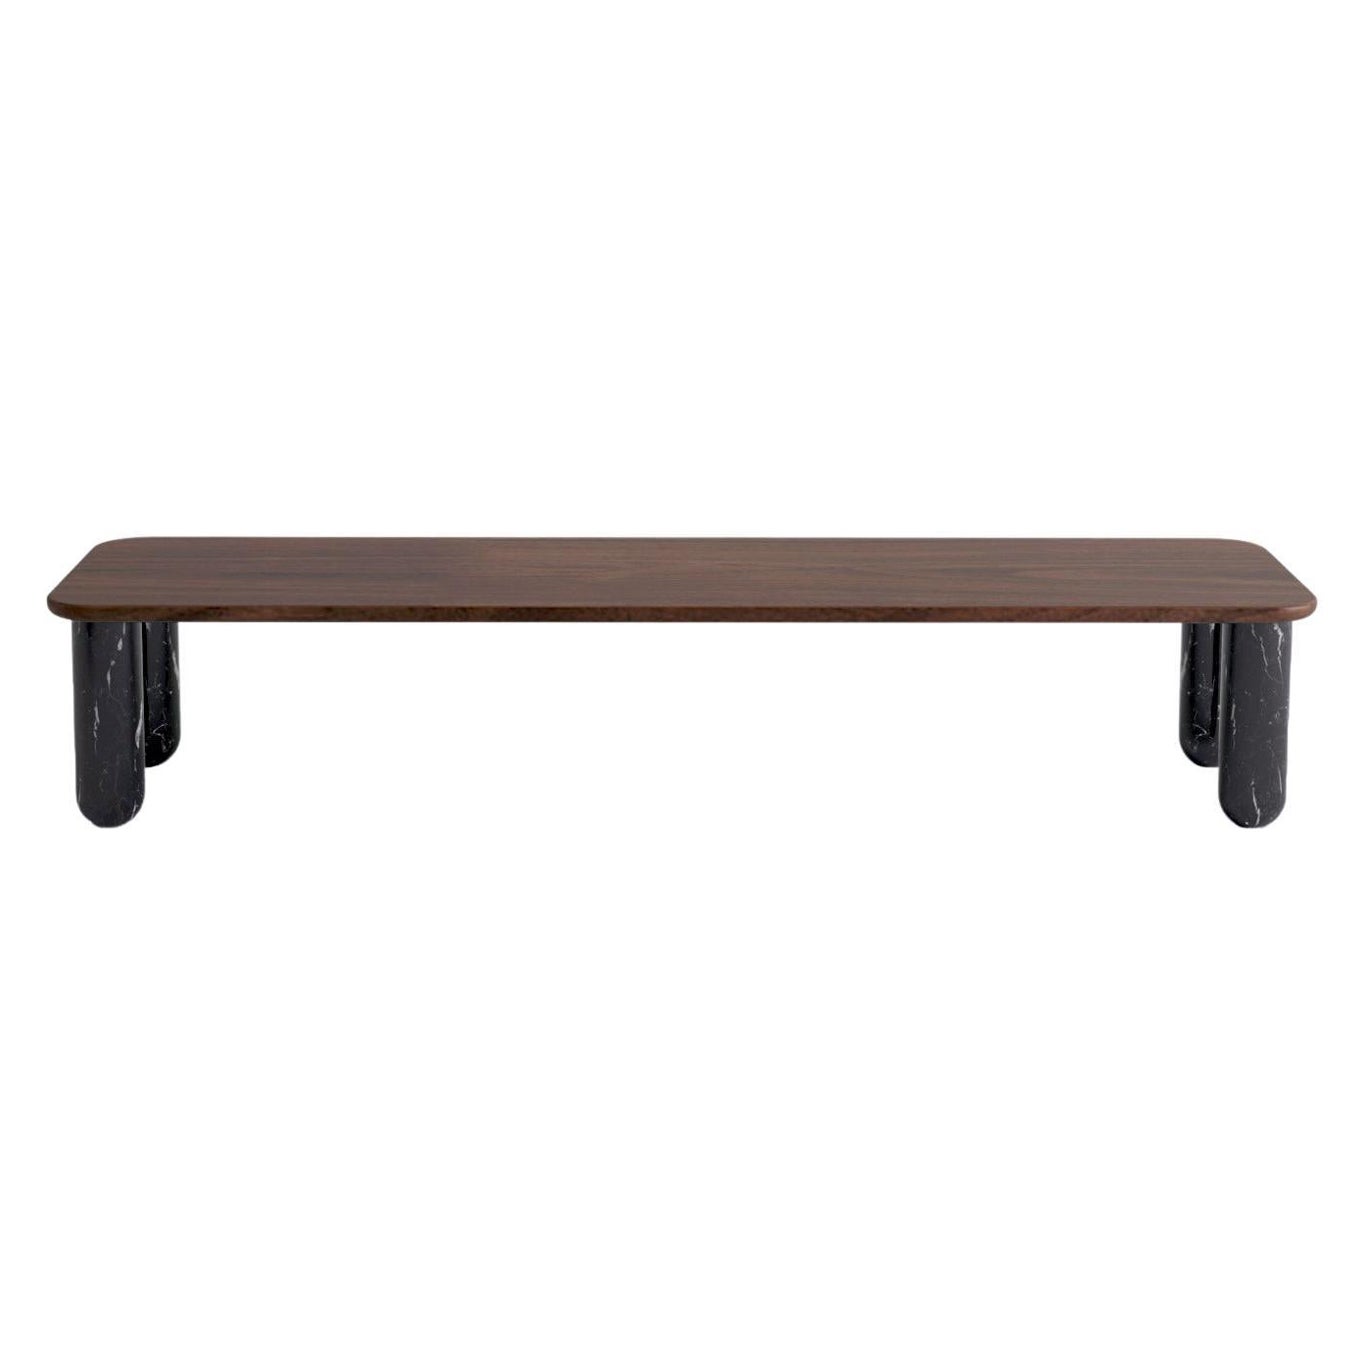 Large Walnut and Black Marble "Sunday" Coffee Table, Jean-Baptiste Souletie For Sale